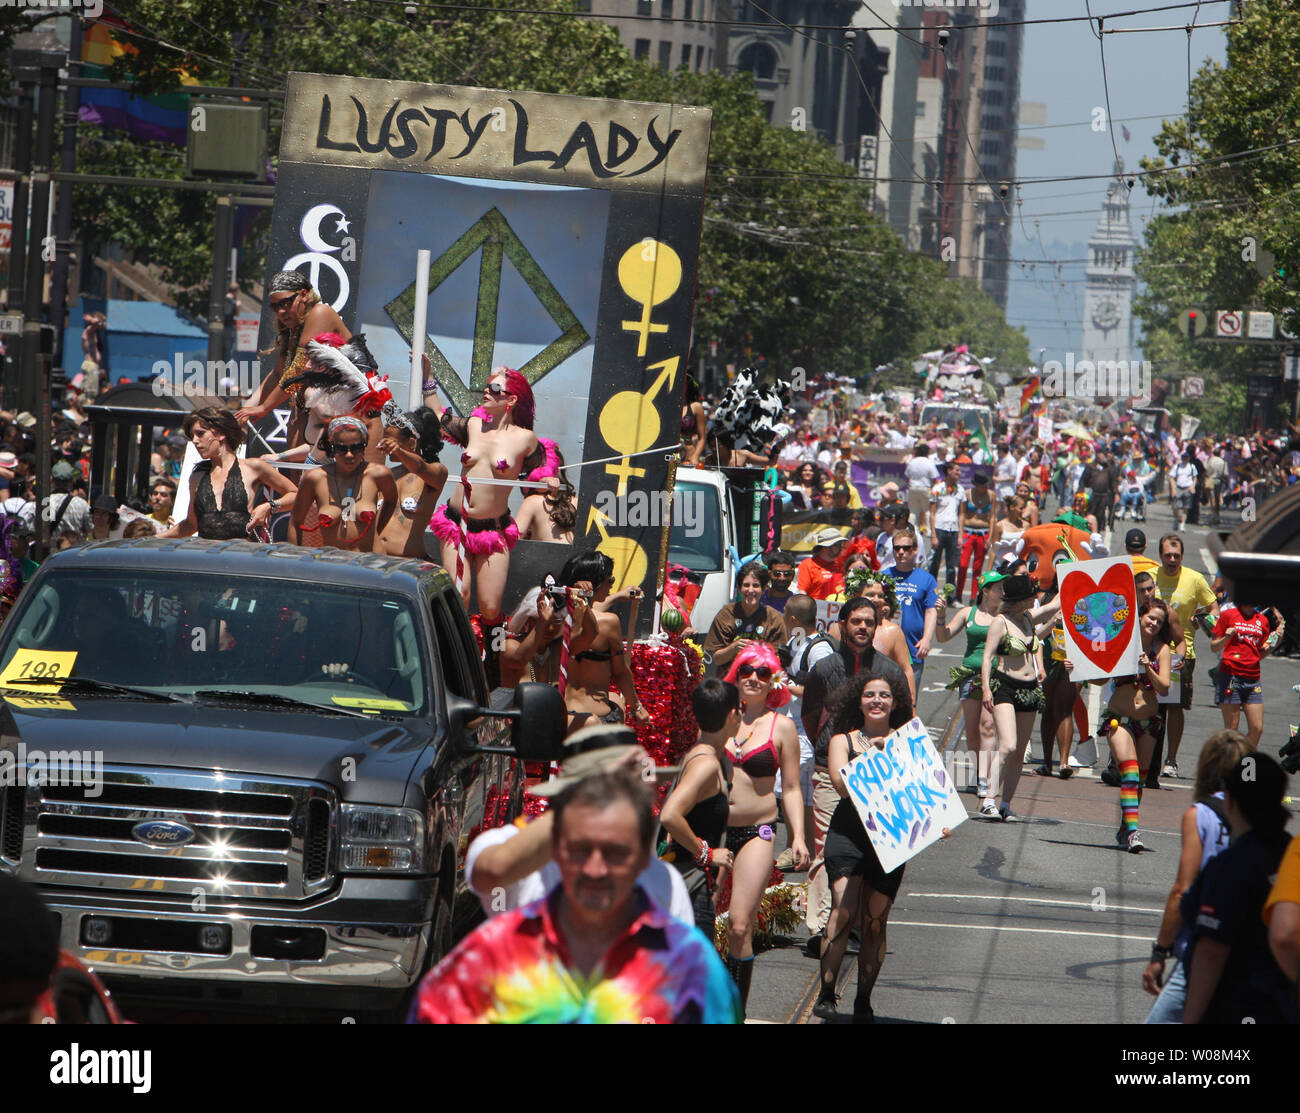 Participants parade up Market Street during the Gay Pride celebration in San Francisco on June 28, 2009.    (UPI Photo/Terry Schmitt) Stock Photo